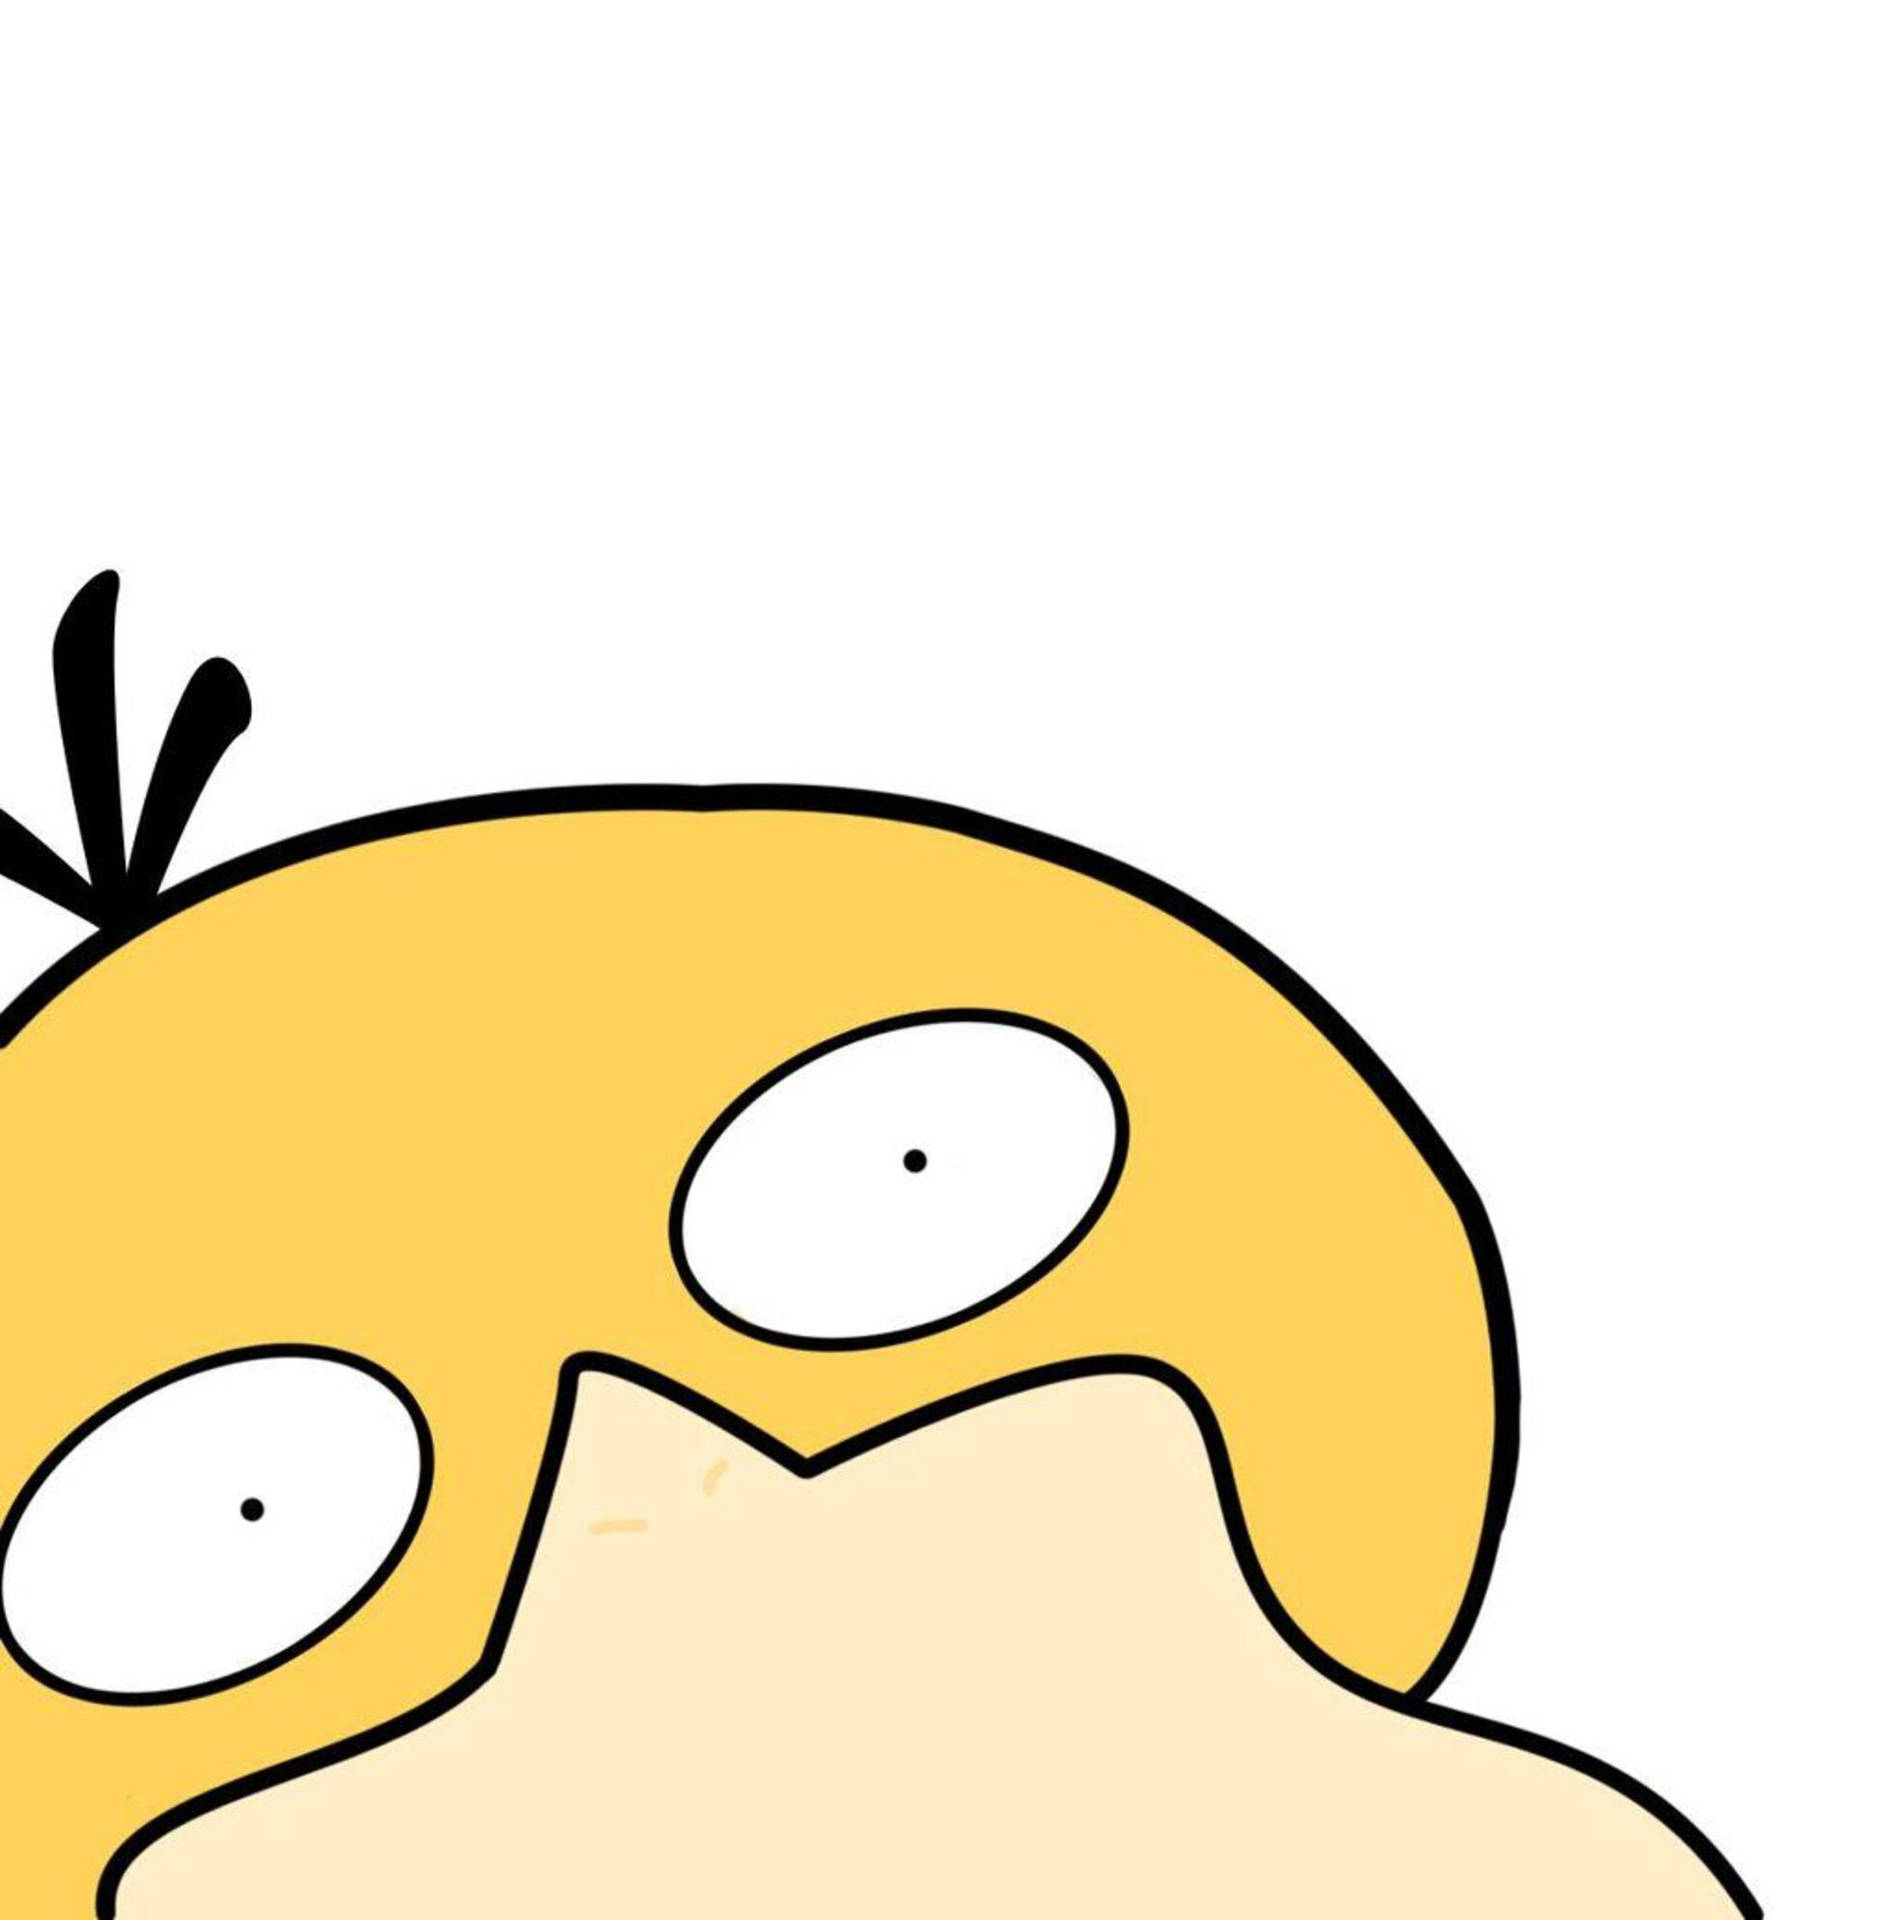 You'll Be Surprised By What This Peeking Psyduck Can Do.